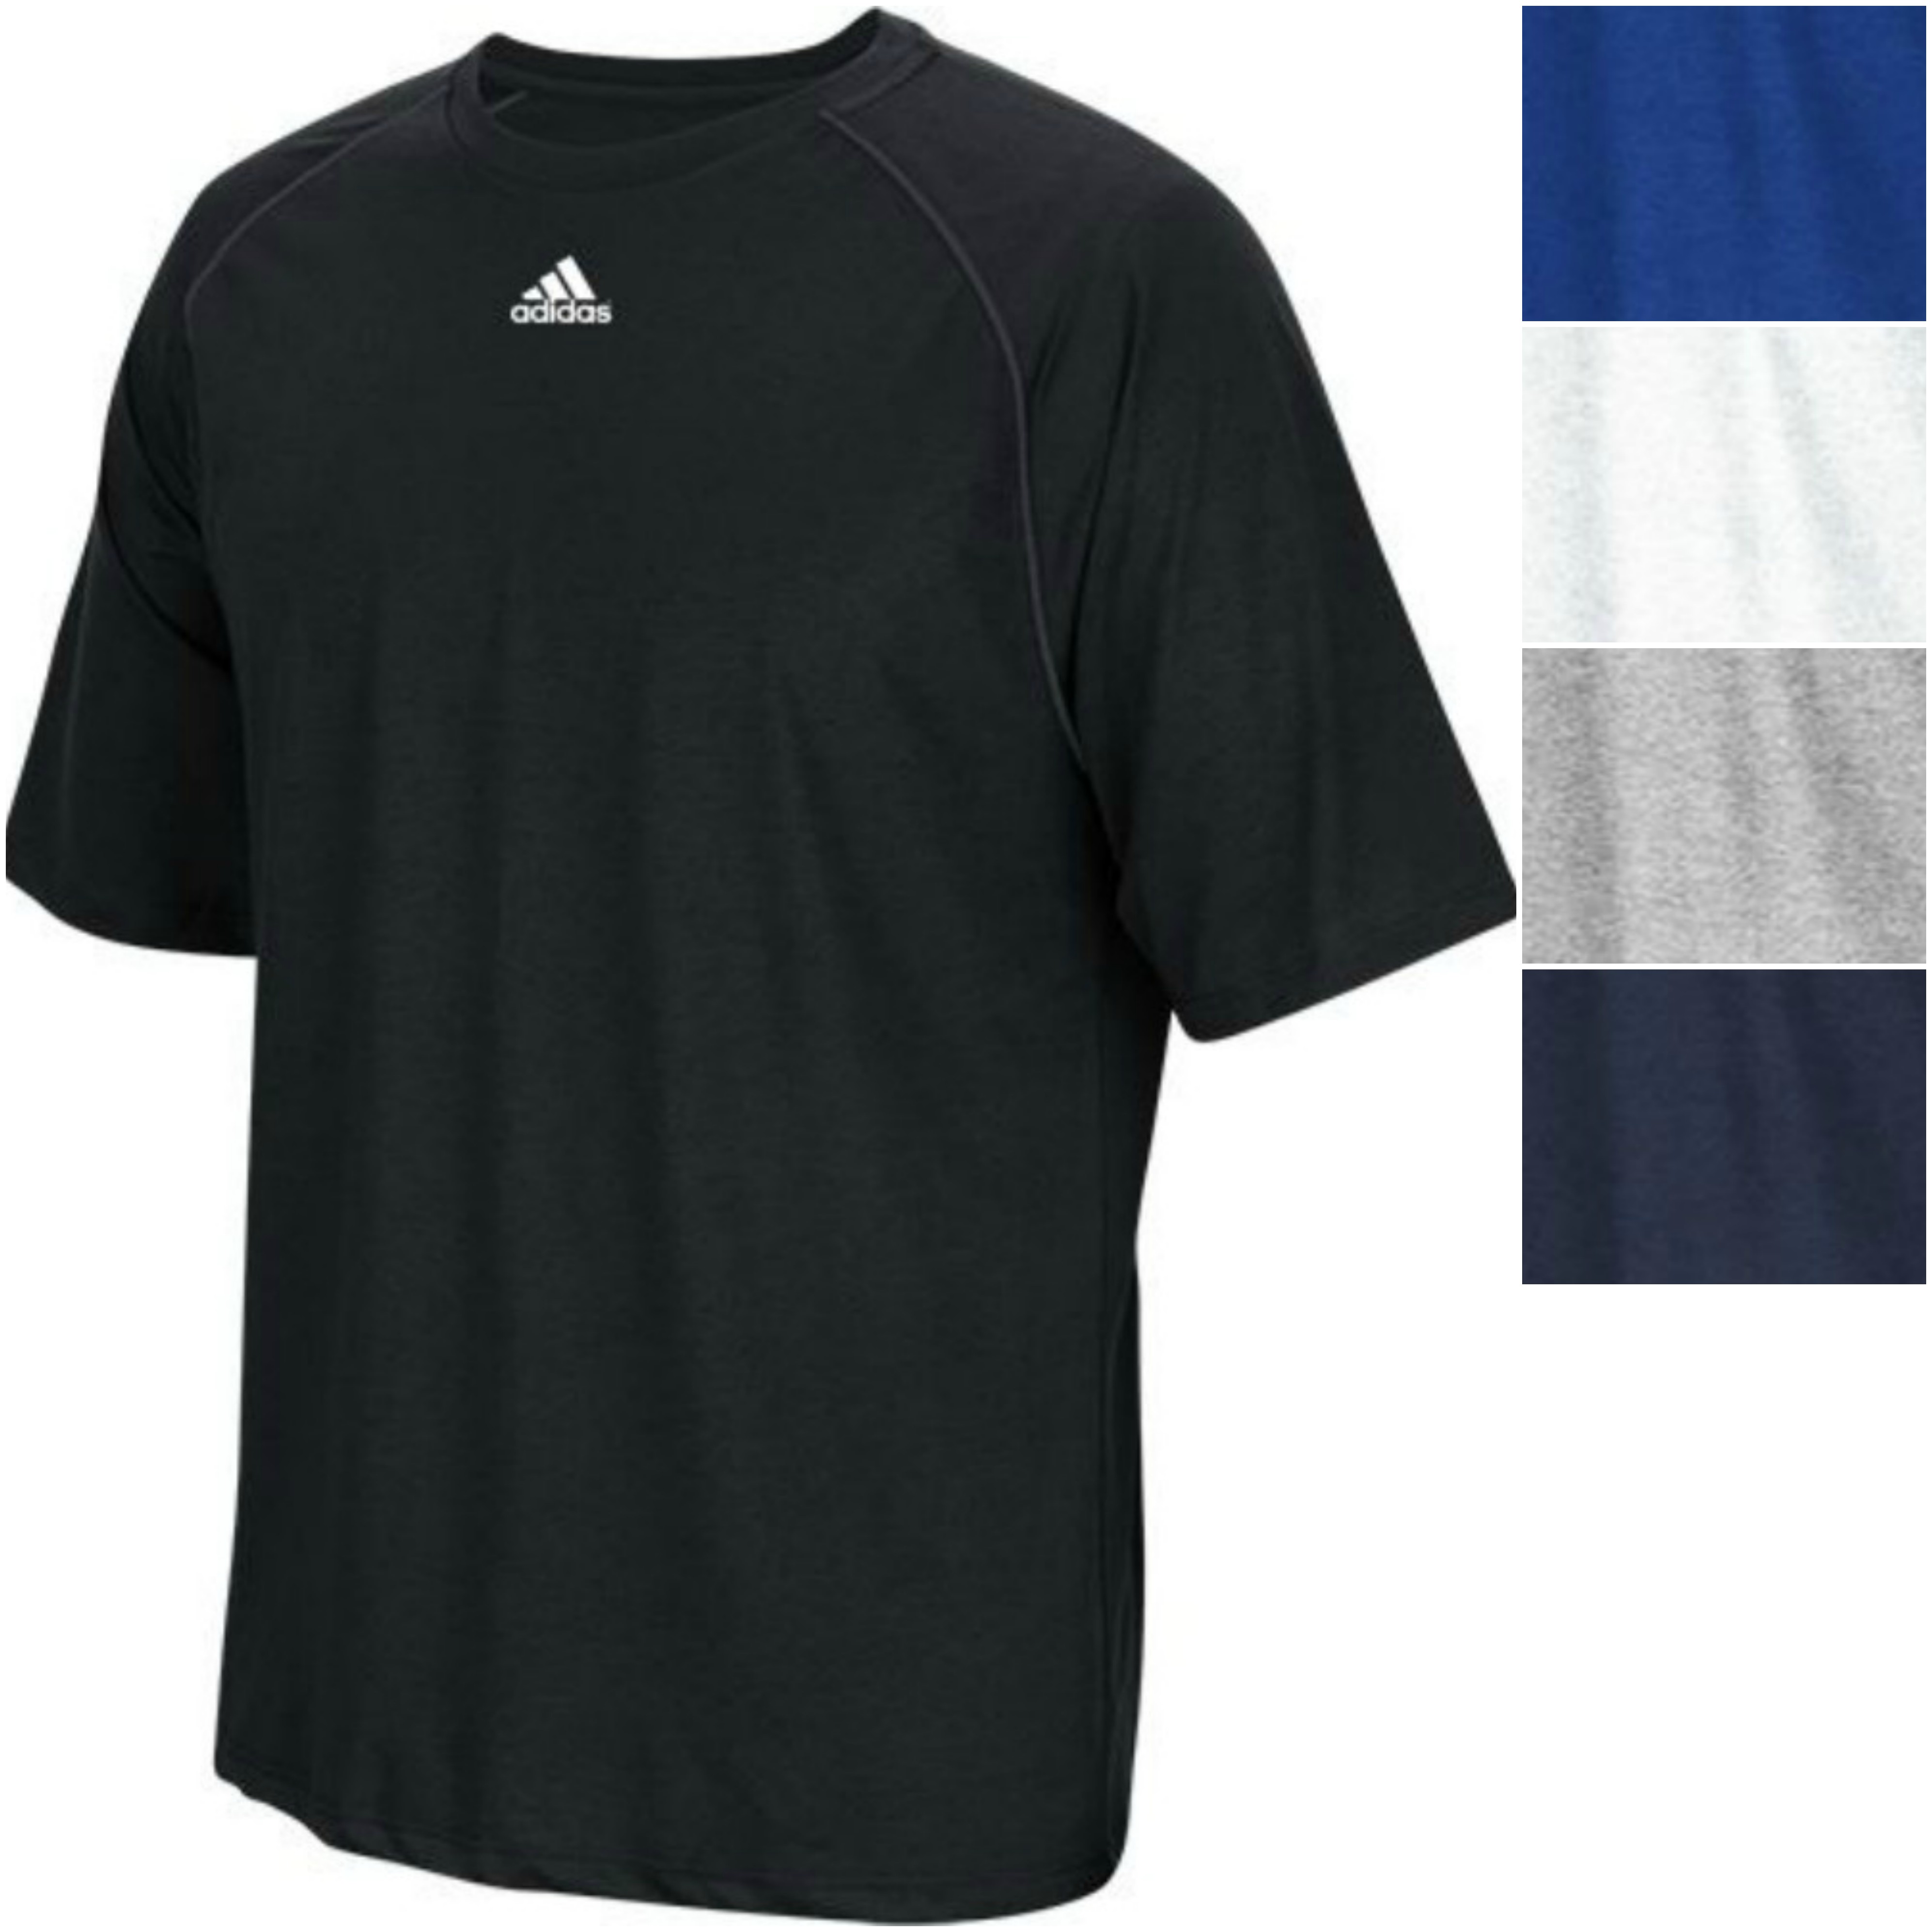 adidas Men’s CLIMALITE Short Sleeve Athletic Tee—$13.99! (44% OFF)